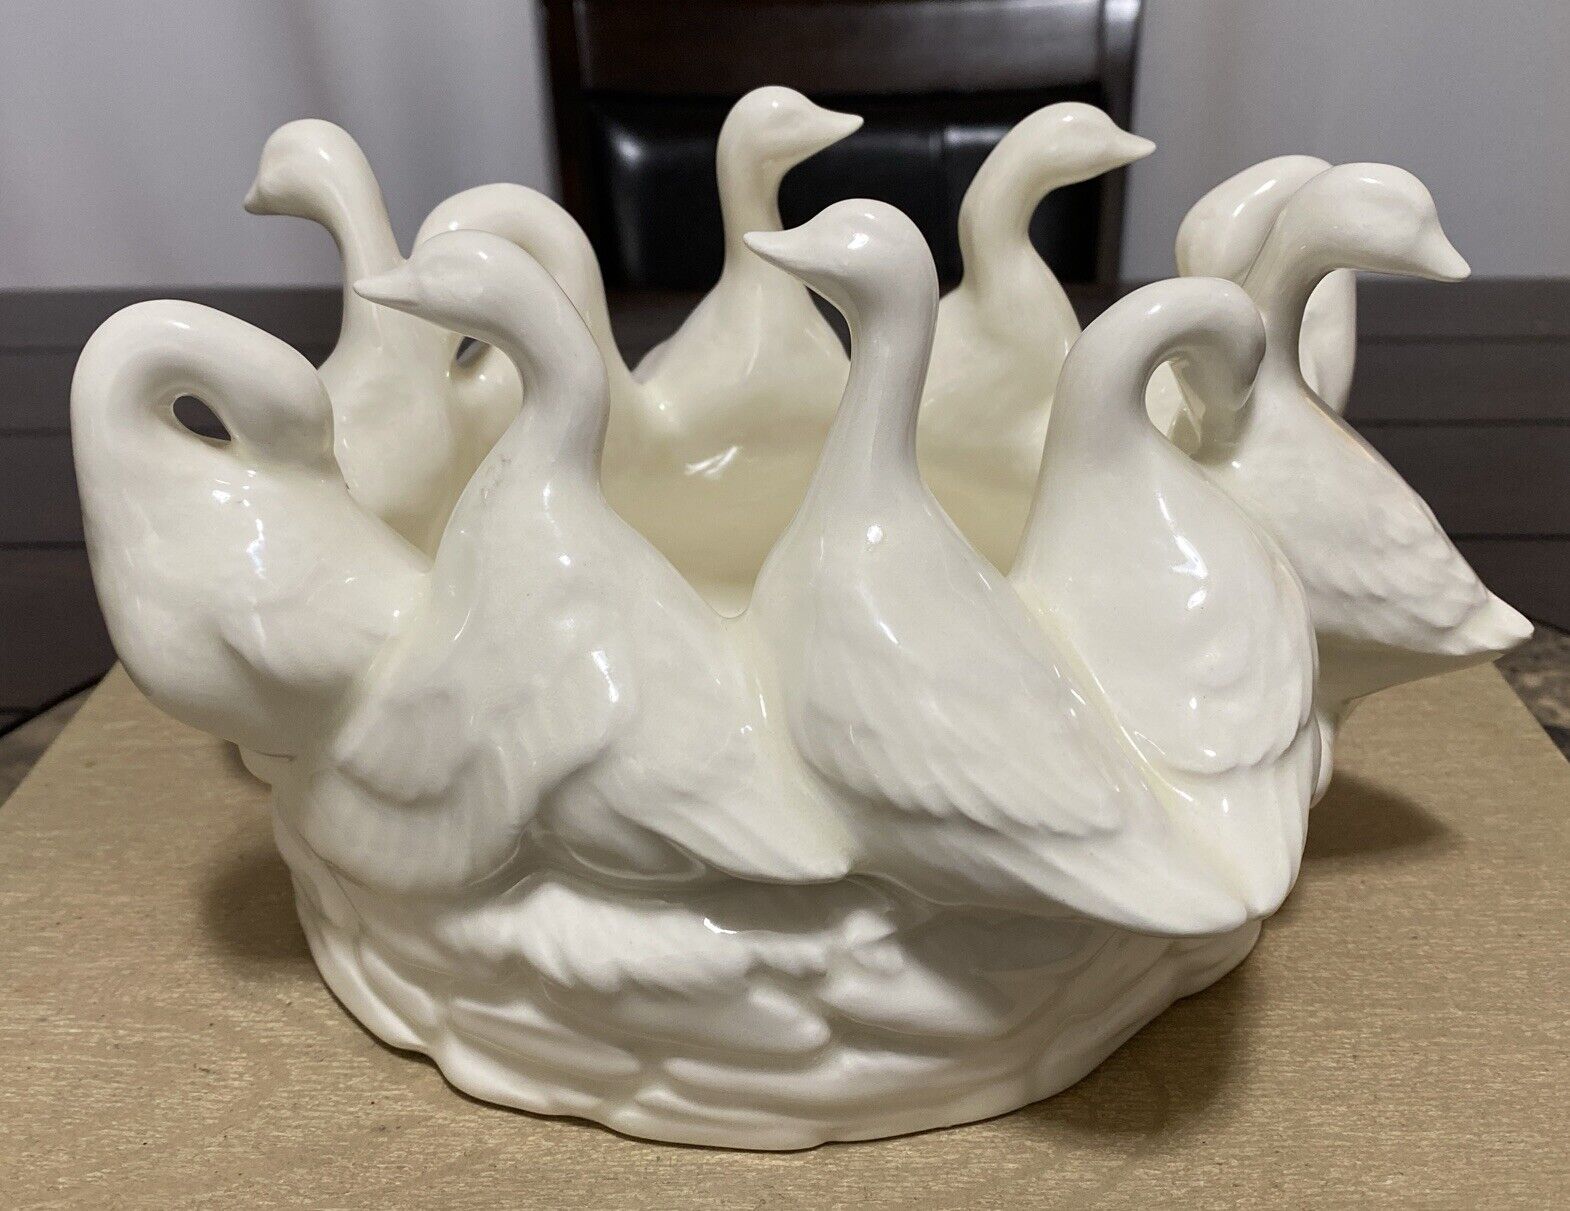 Vintage Ceramic Geese On Nest Planter Bowl Signed 10 Geese Two Piece Mold